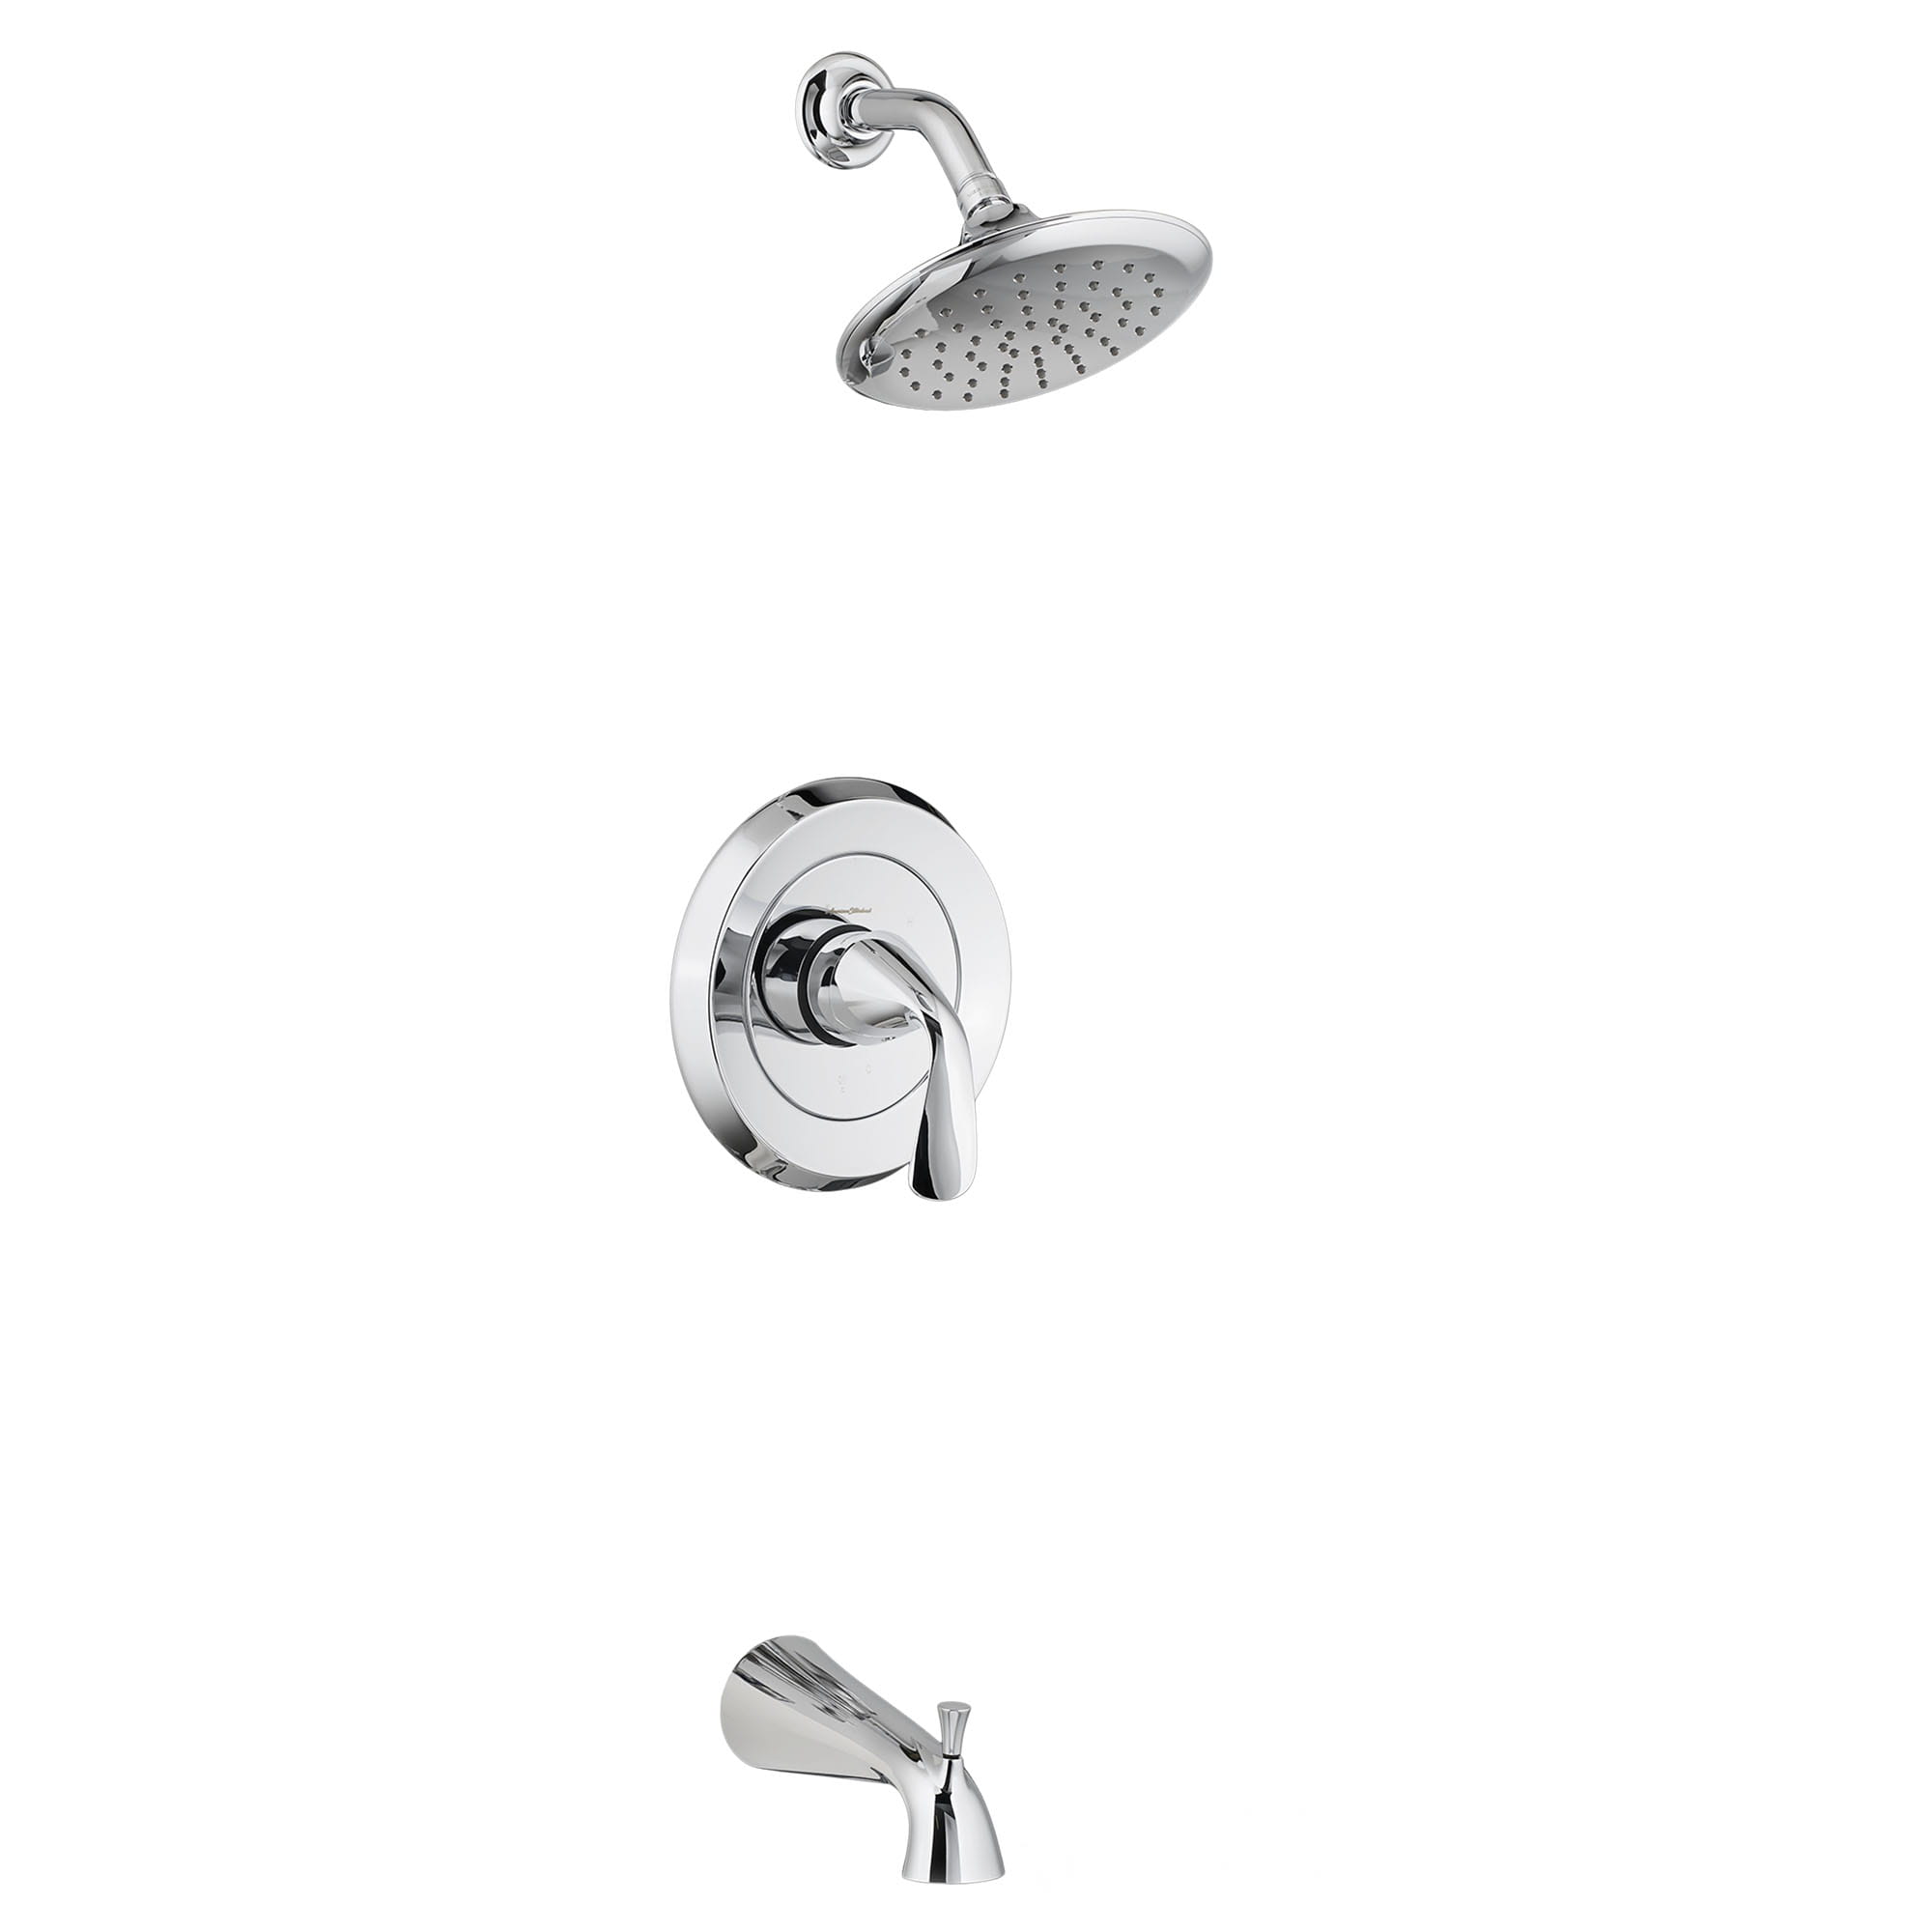 Fluent® 2.5 gpm/9.5 L/min Tub and Shower Trim Kit With Showerhead, Double Ceramic Pressure Balance Cartridge With Lever Handle